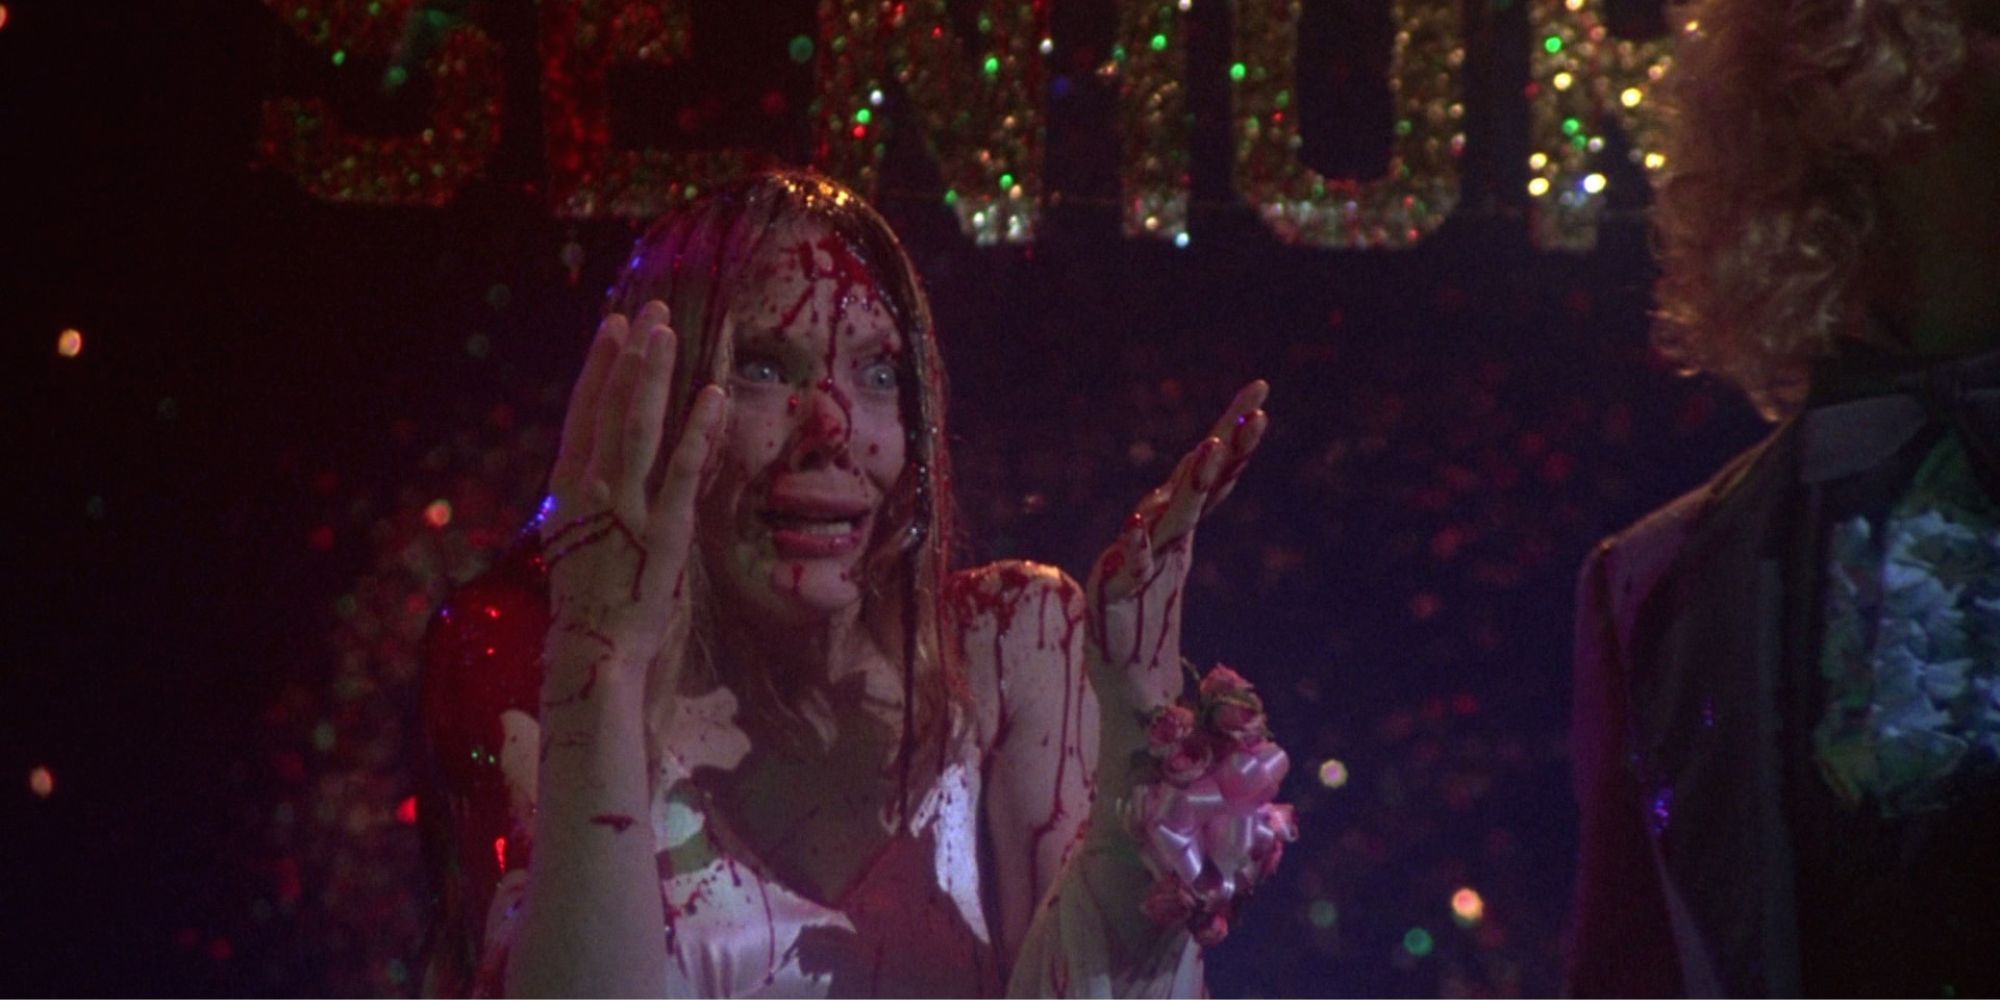 carrie covered in blood at school dance